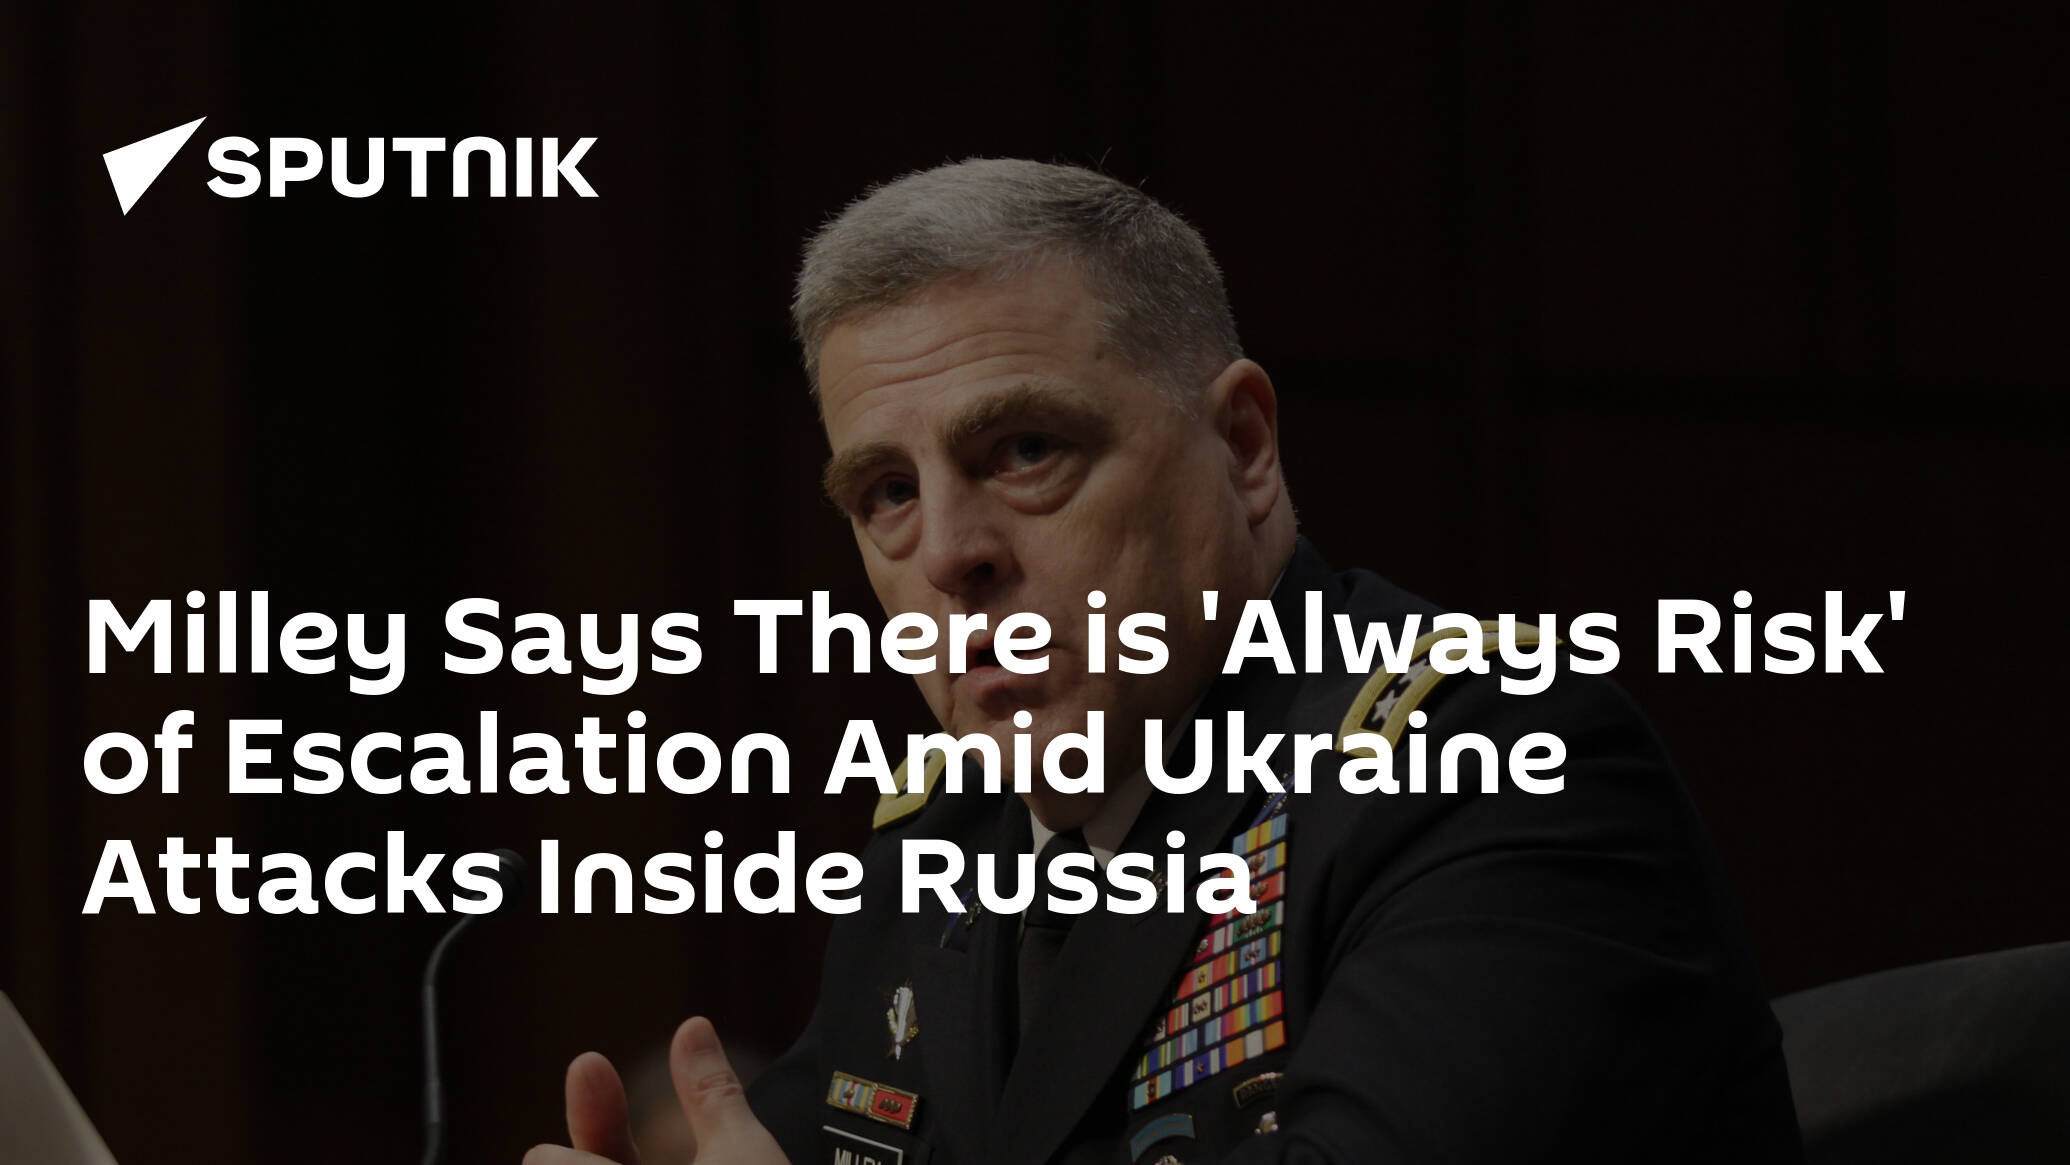 Milley Says There is 'Always Risk' of Escalation Amid Ukraine Attacks Inside Russia